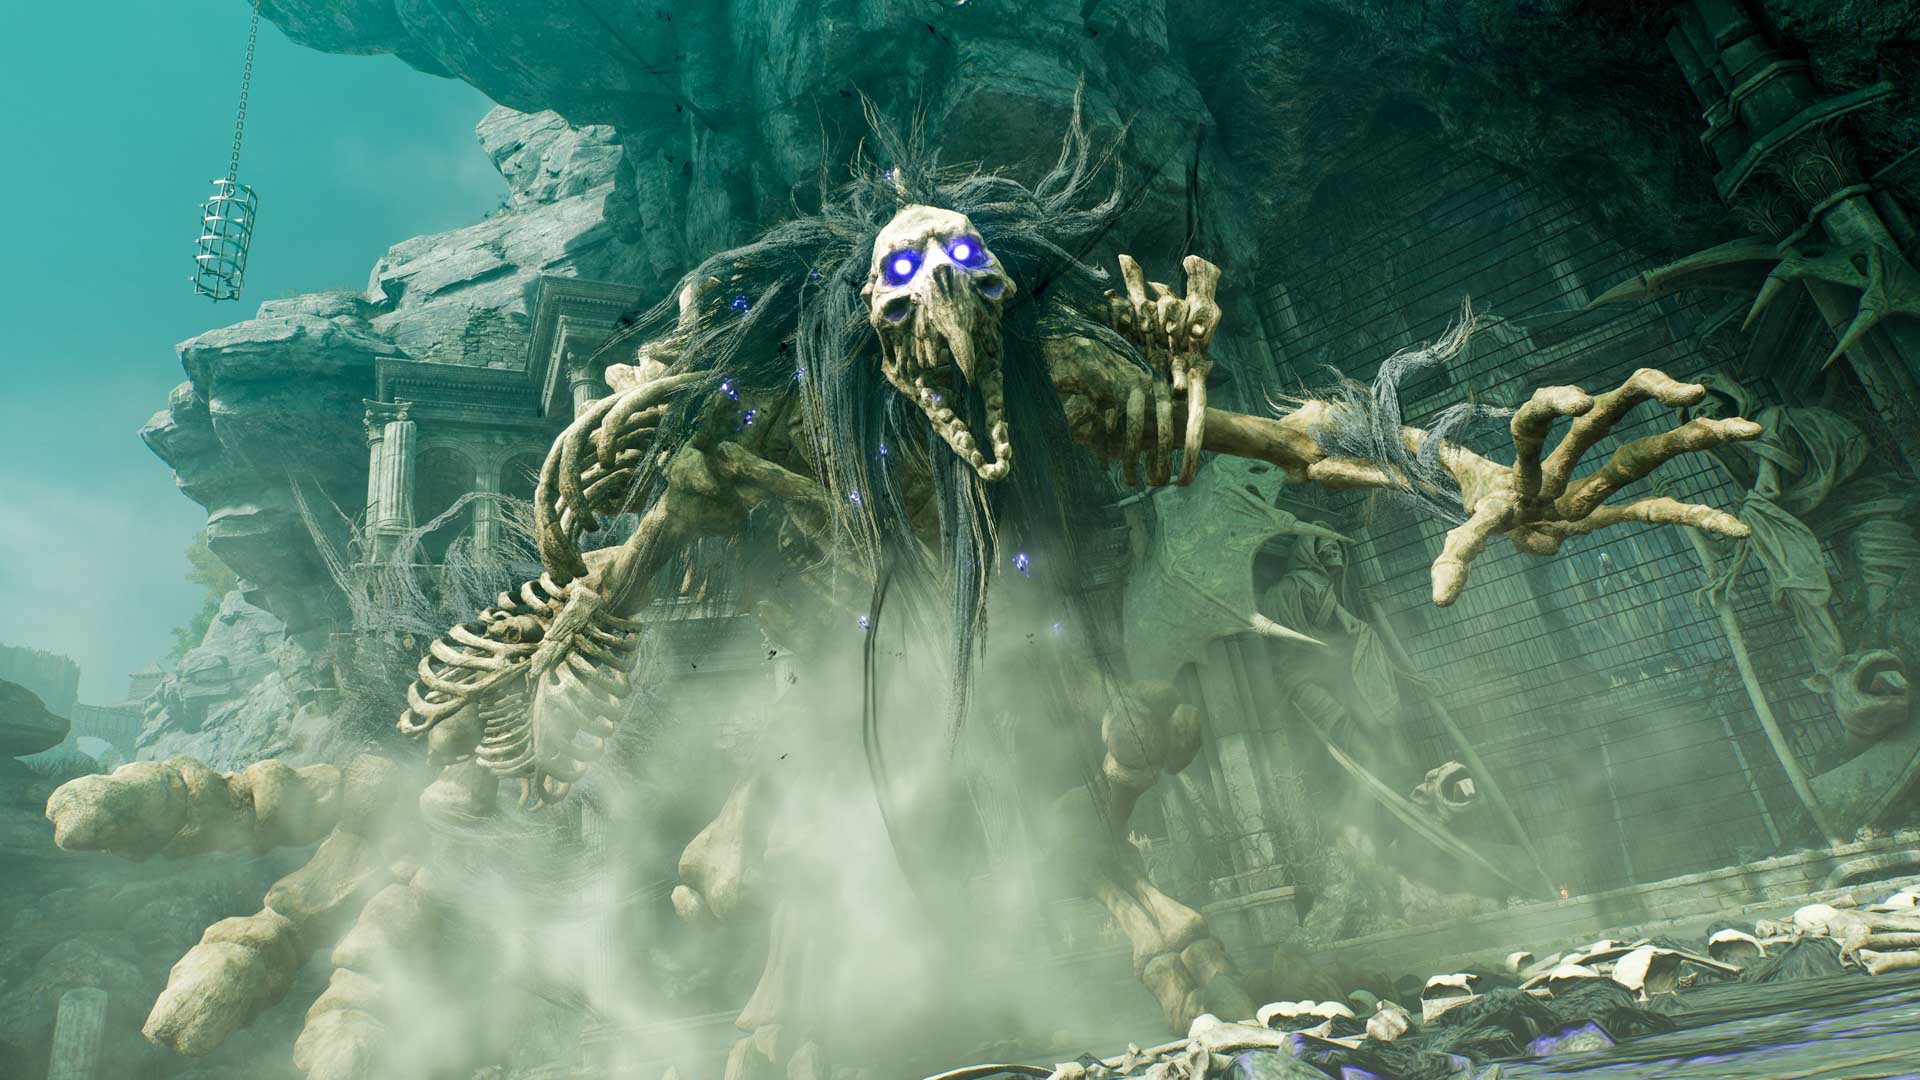 A skeletal colossus with glowing blue eyes and shaggy gray hair reaches it giant hands toward the viewer.  A cloud of dust covers the ground.